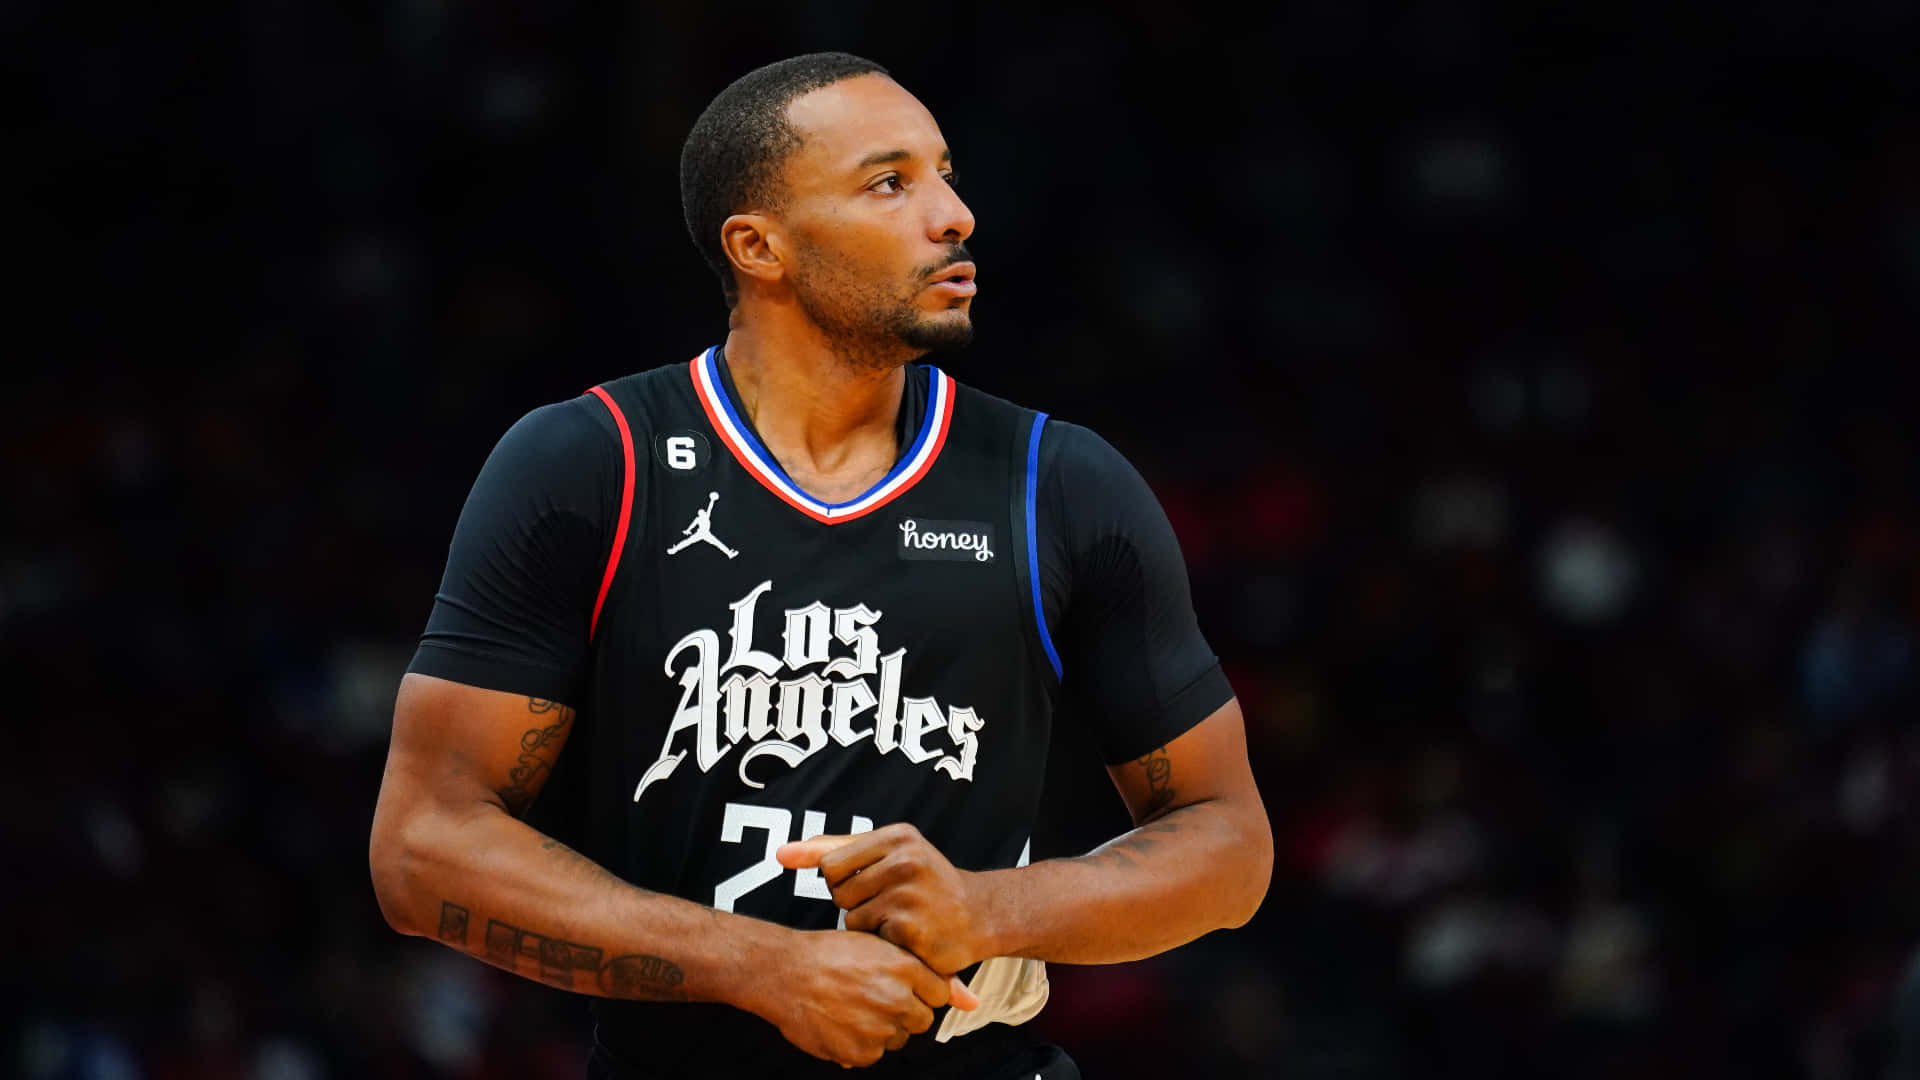 American Basketball Player Norman Powell Clippers Victory Wallpaper